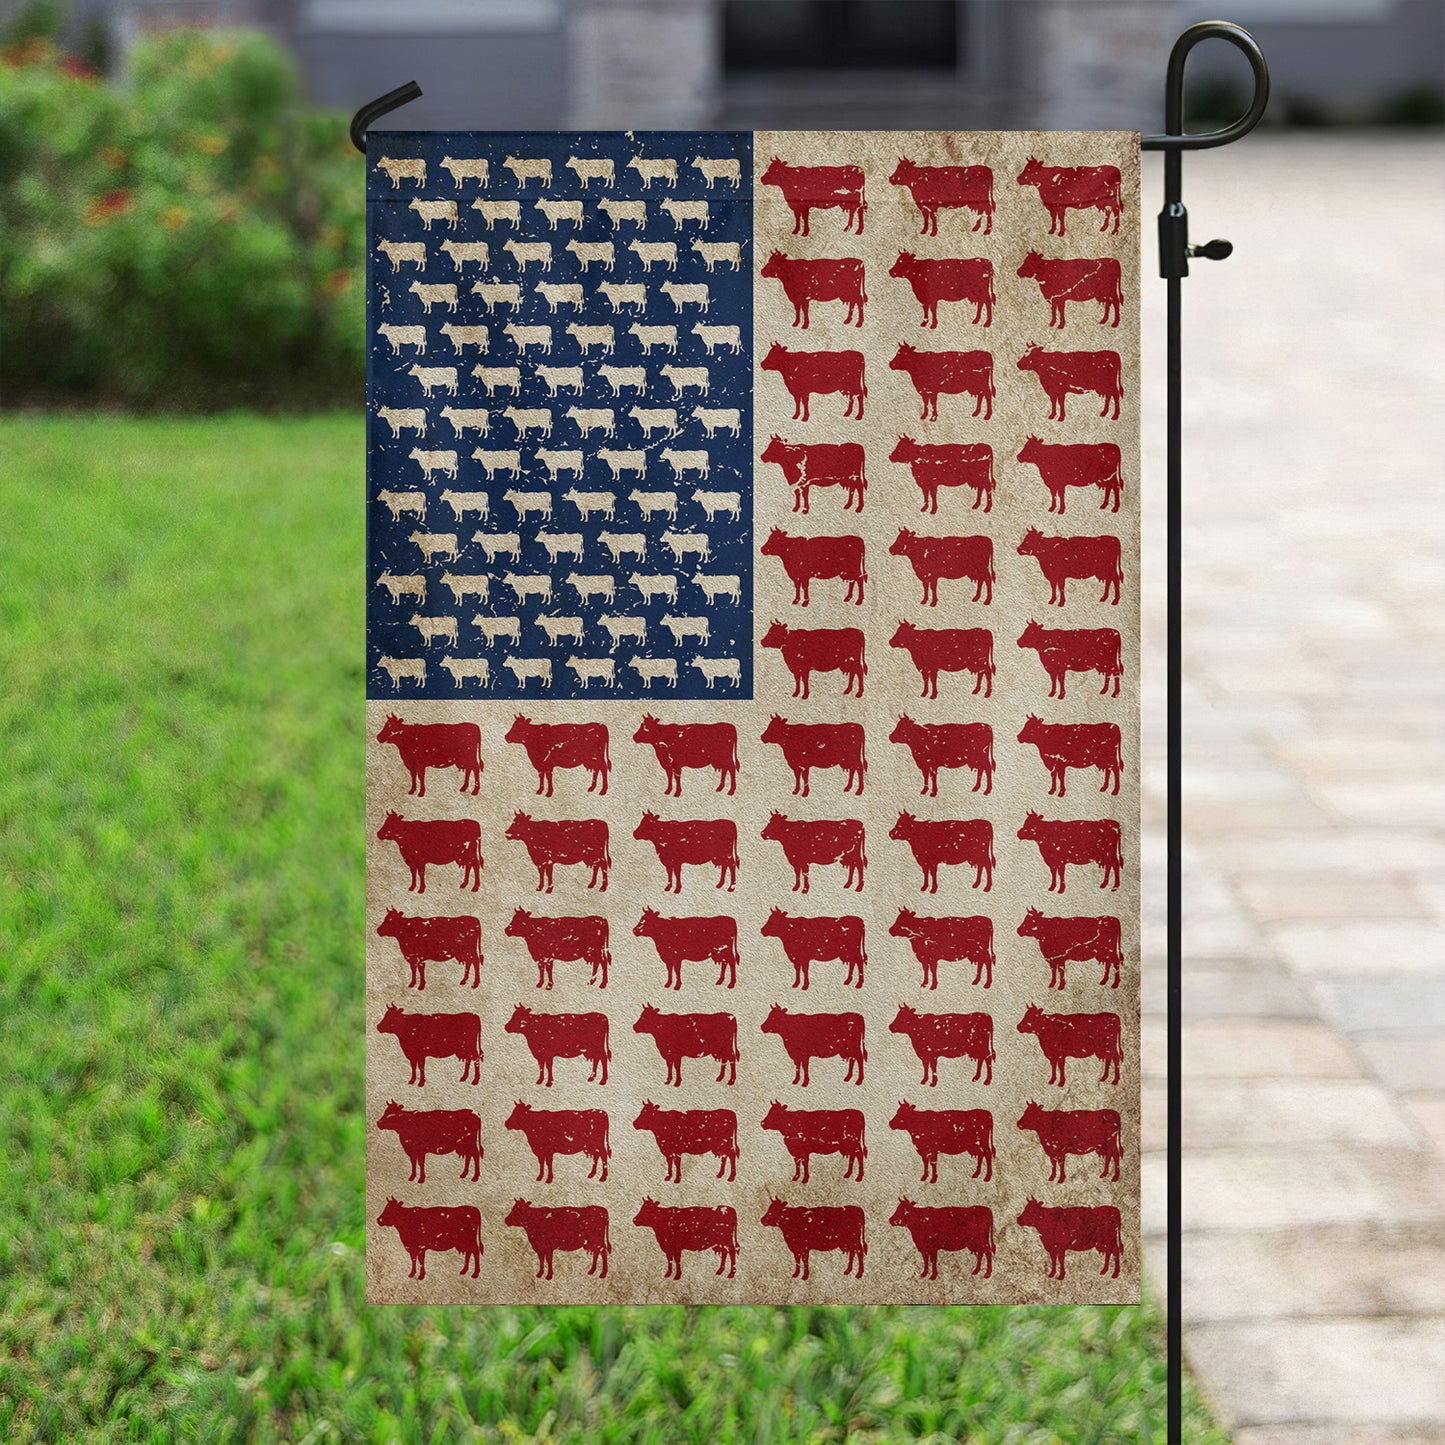 July 4th Cow Garden Flag & House Flag, Cow Arrange The USA Flag, Independence Day Yard Flag Gift For Cow Lovers, Farmers Flag